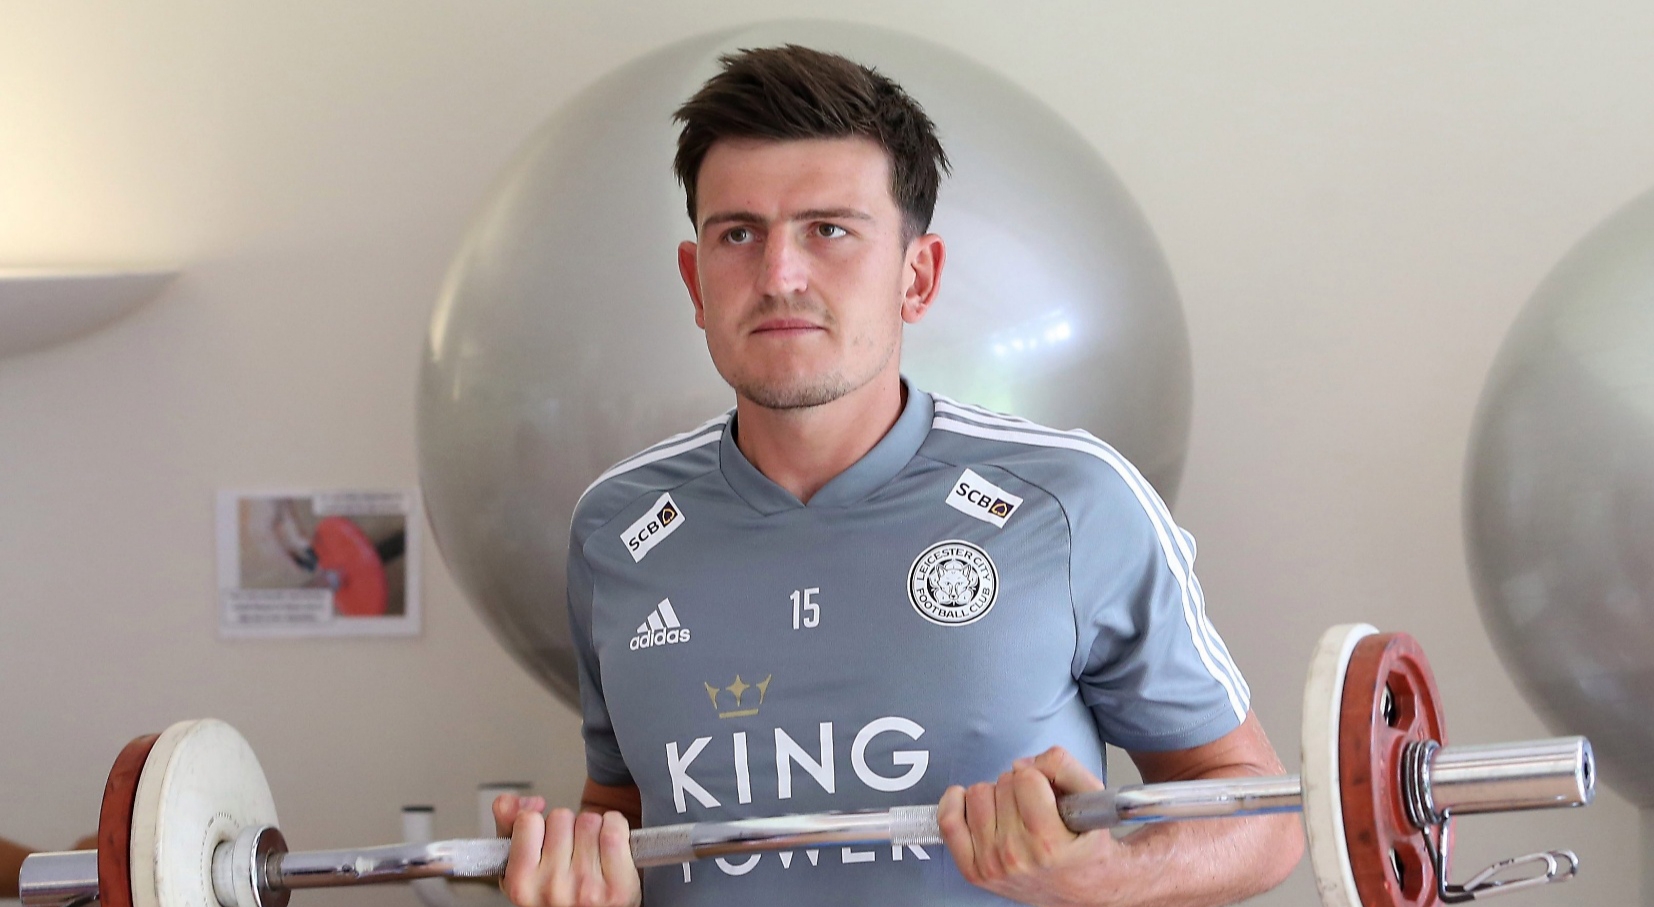 Man Utd agree record £80m Maguire transfer with Leicester defender set for medical tomorrow